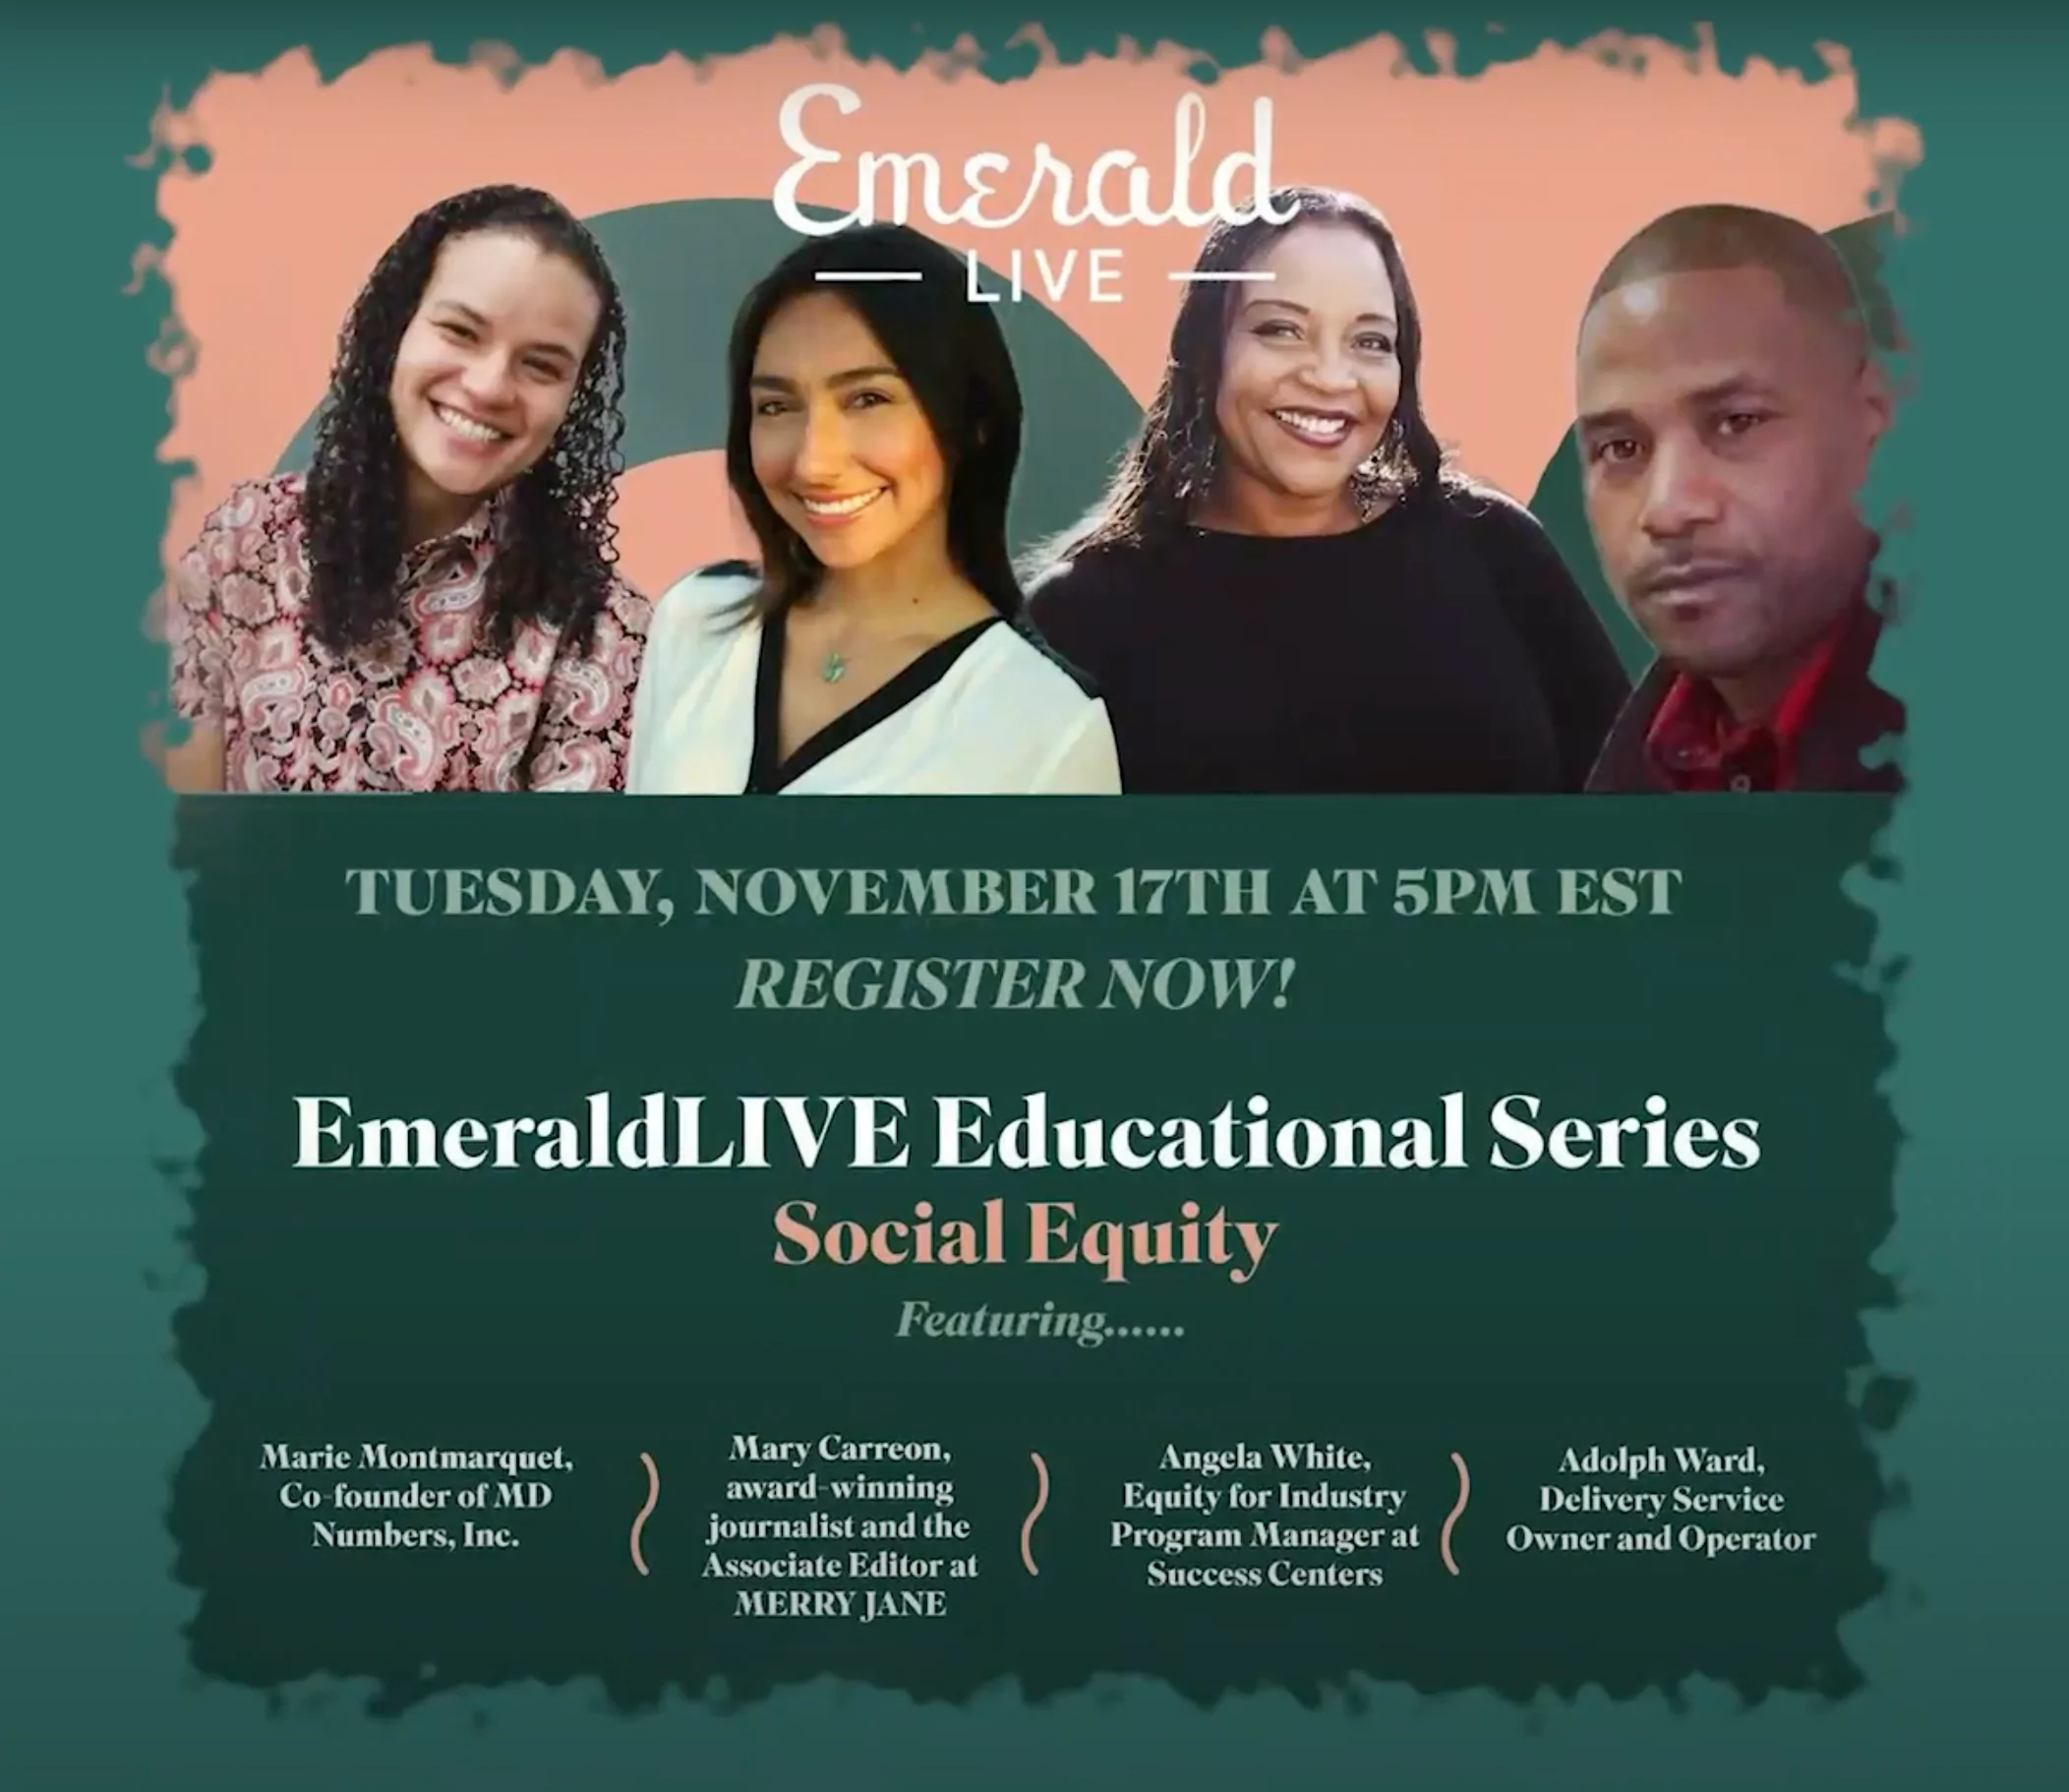 'Emerald Live: Social Equity' flyer featuring guest speakers Marie Montmarquet, Mary Carreon, Angela White, and Adolph Ward.